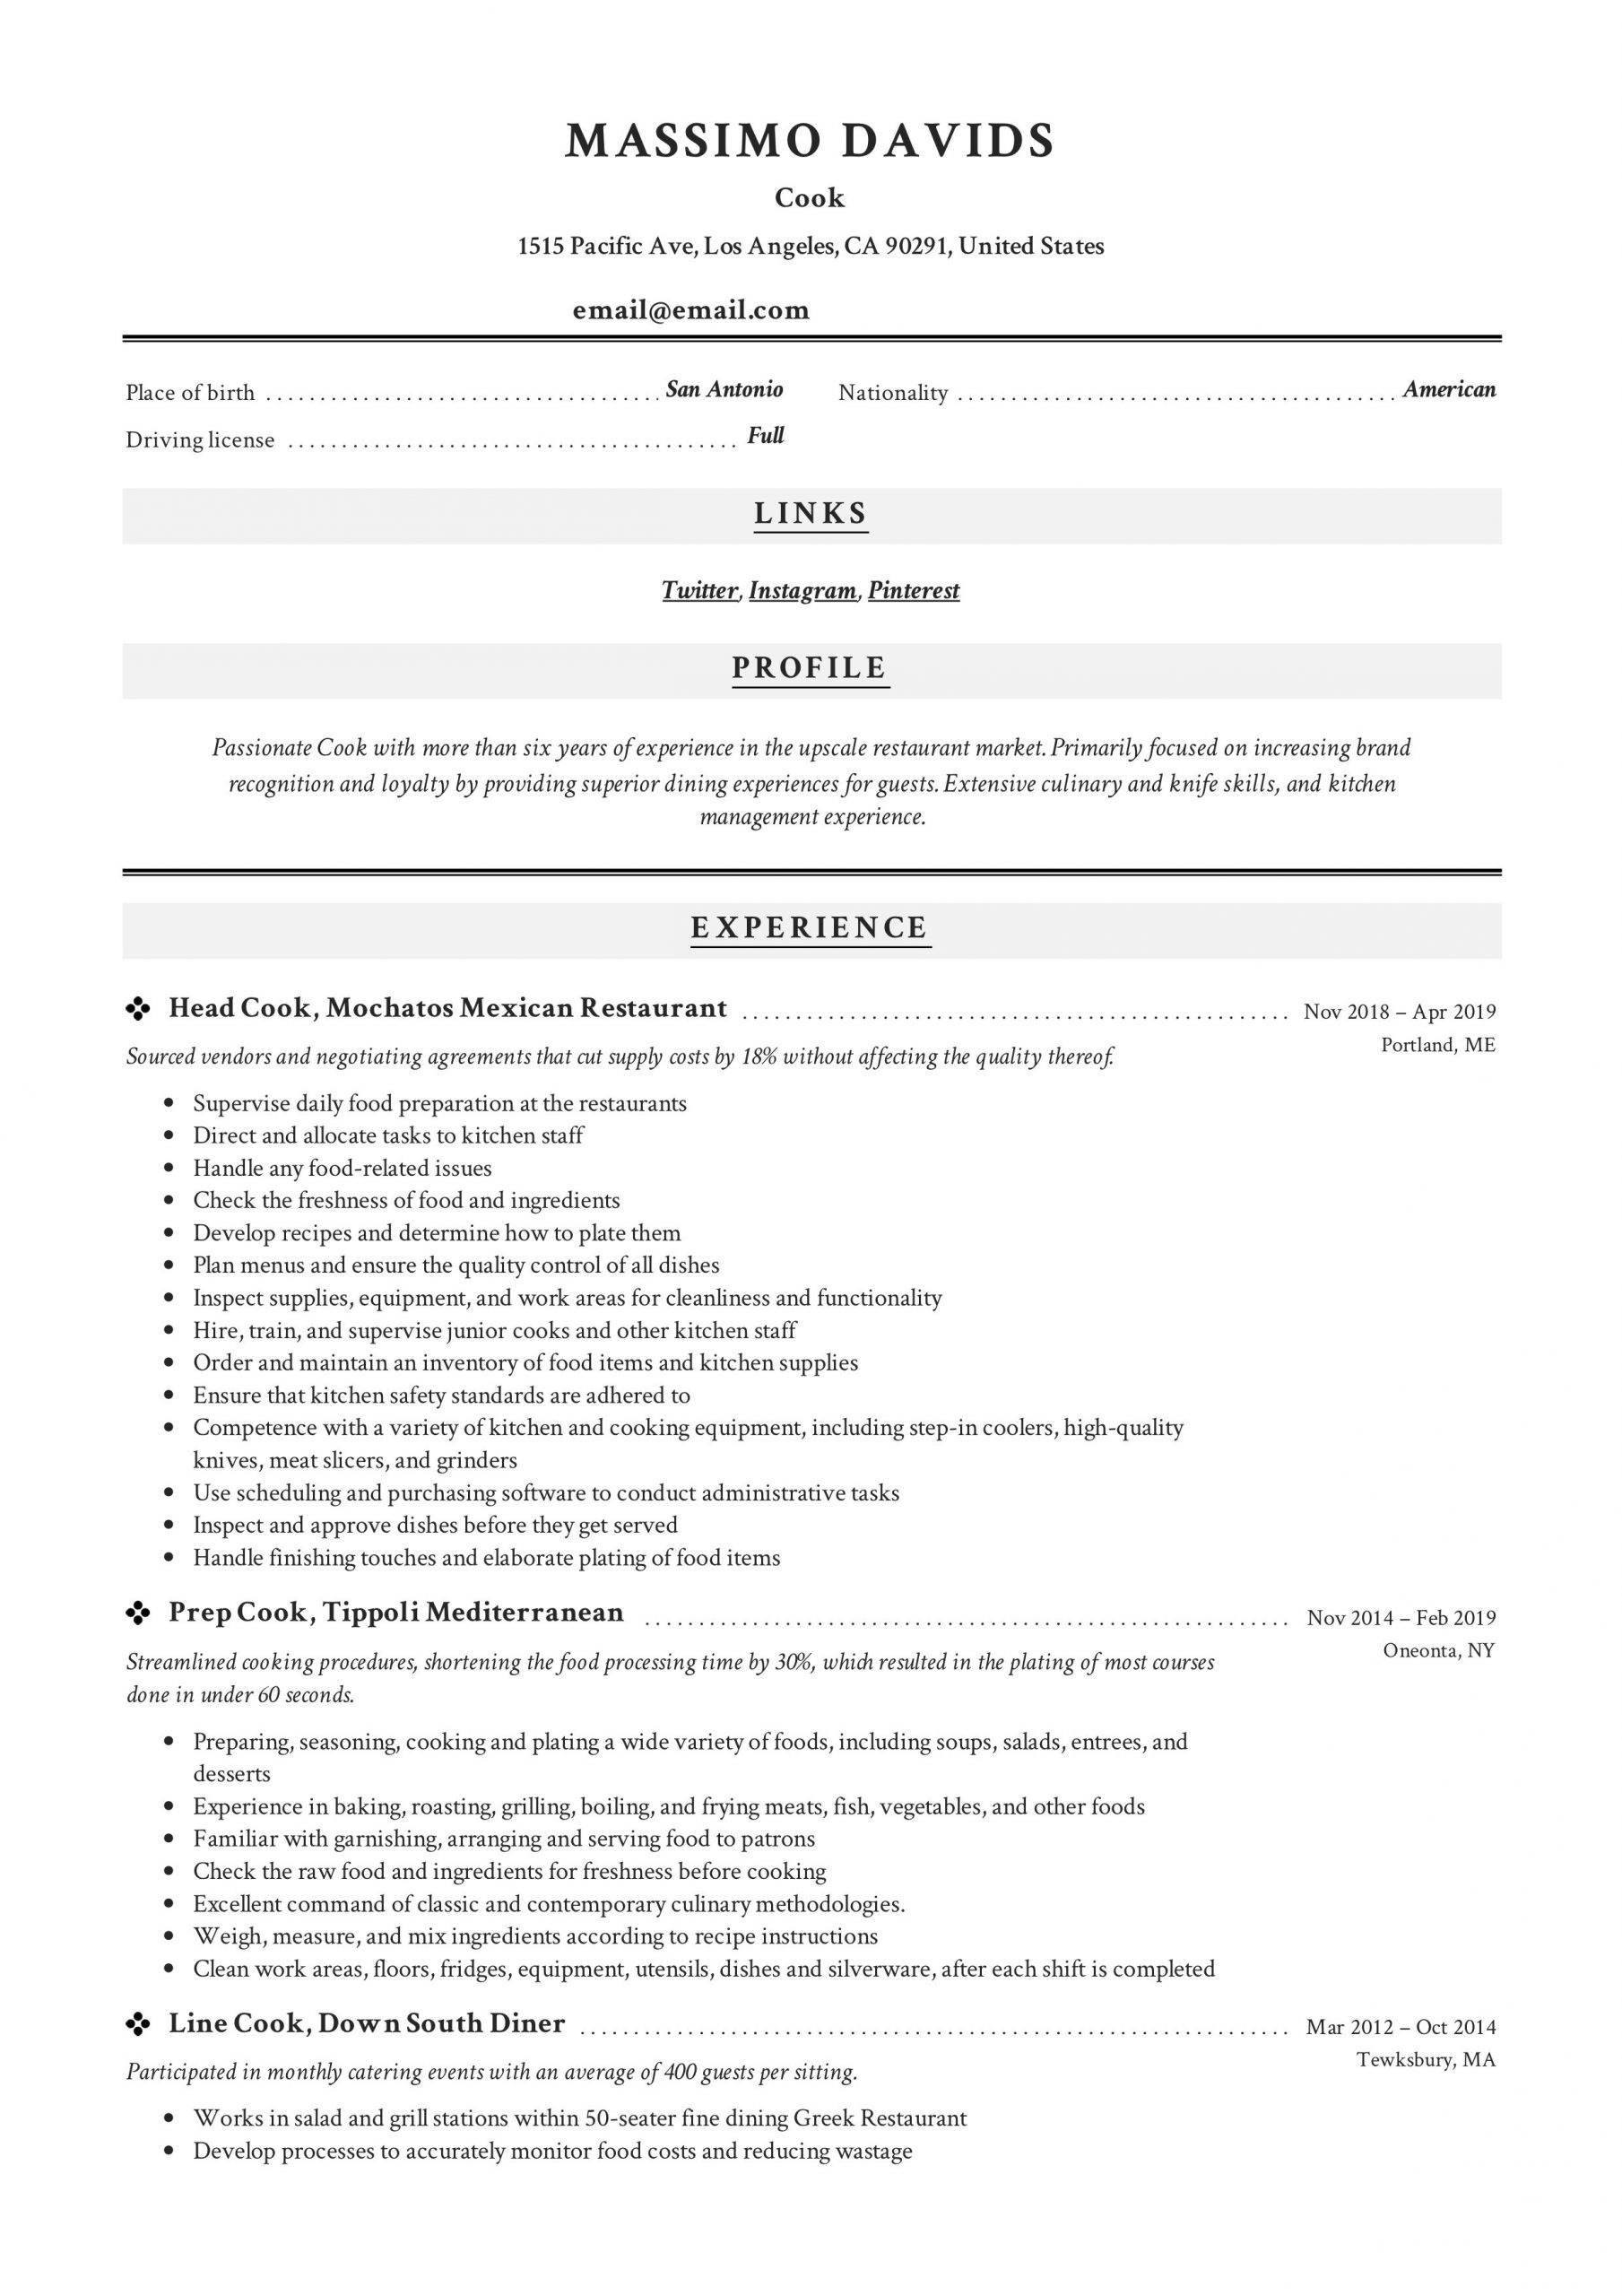 Sample Resume for Cook In Restaurant Cook Resume   Writing Guide 12 Resume Templates 2020